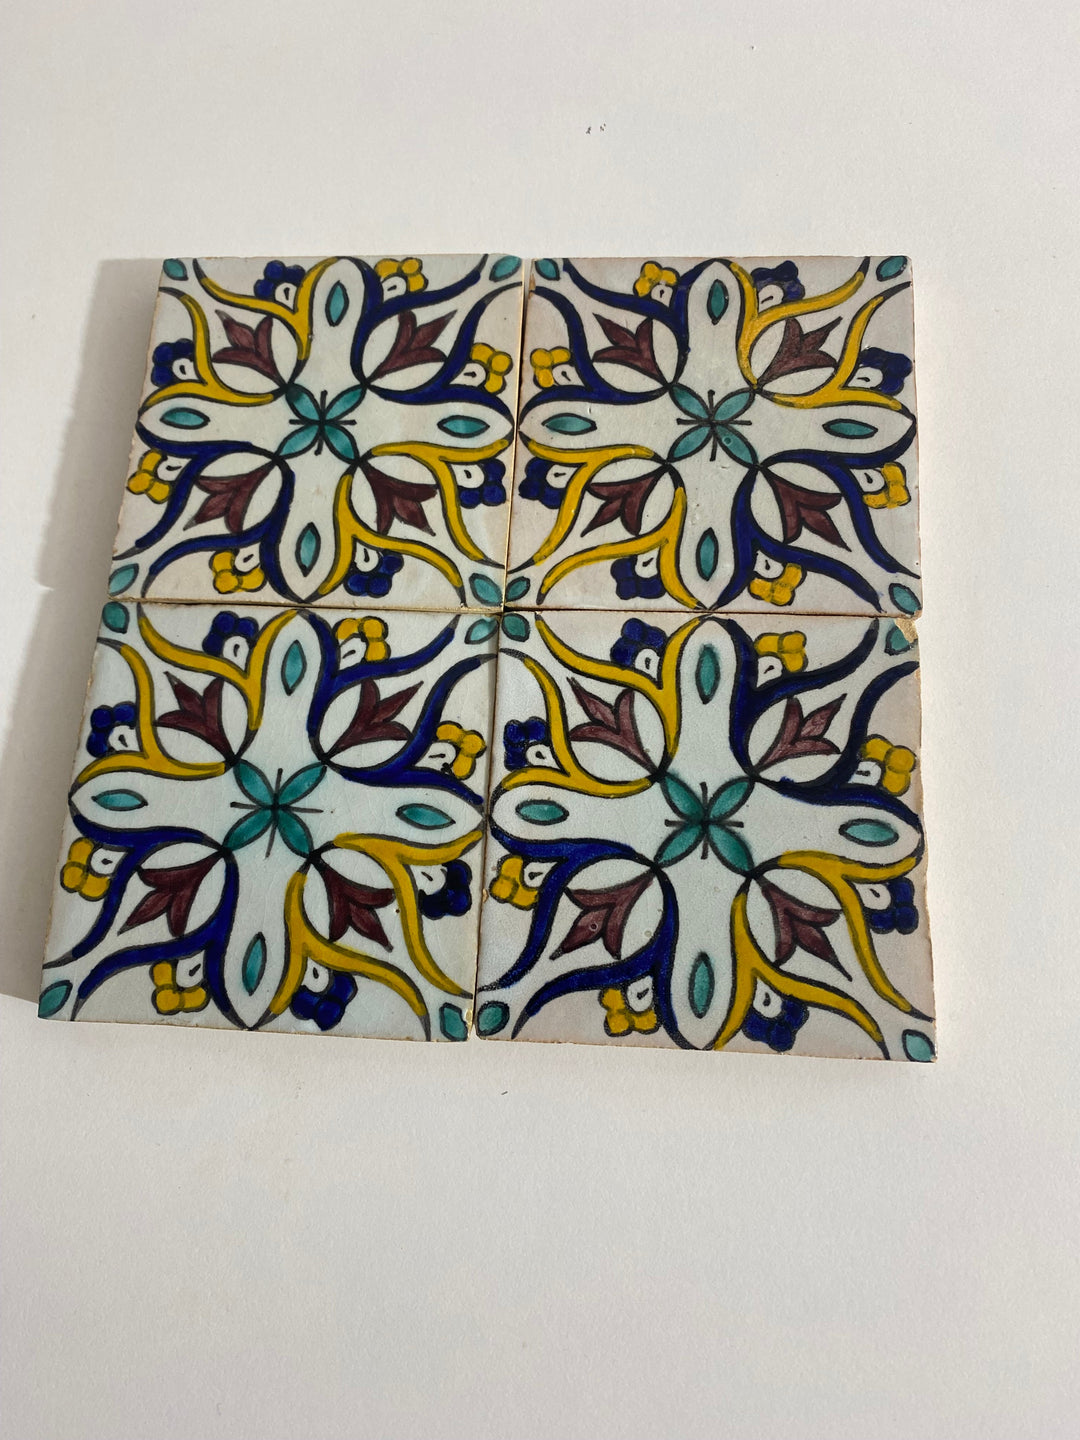 backsplash Ceramic tiles Hand painted tiles 4"x4" 100% for Bathroom Remodeling and kitchen Projects works wall and ground